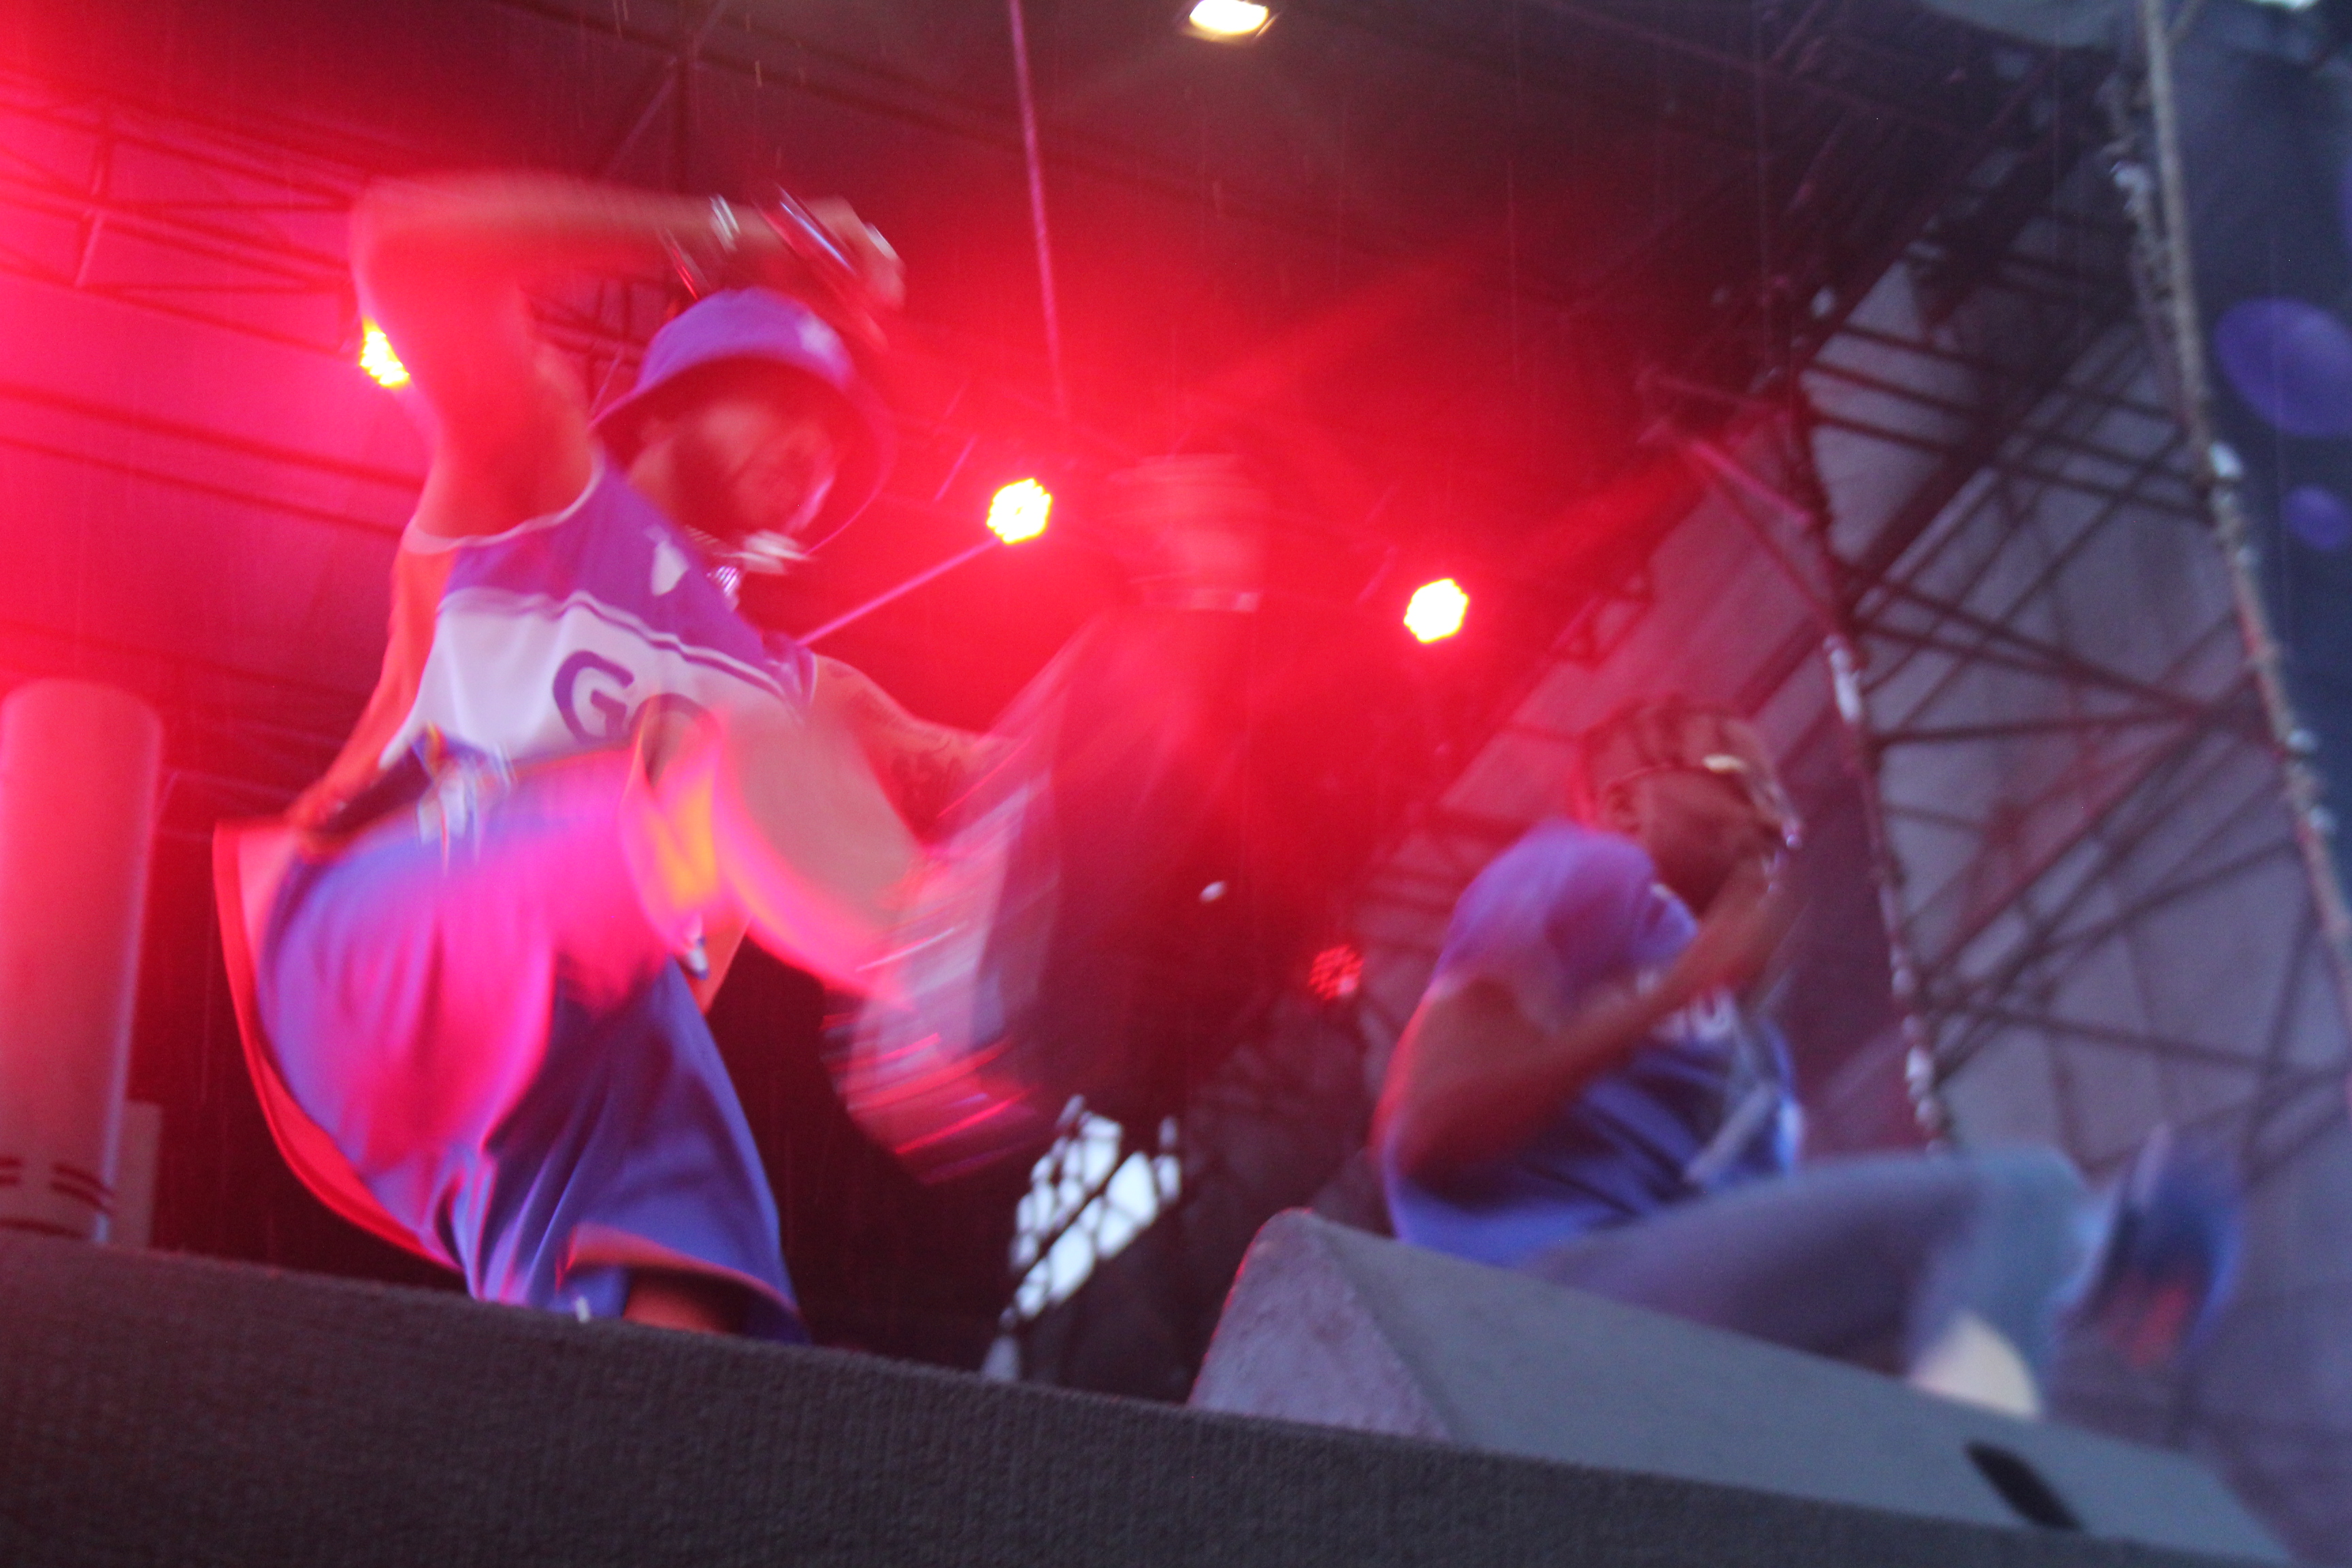 YoungstaCPT in action, refusing to let the rain stop the showat the Galaxy KDay Festival. Image: Oren-Andrew Wentzel